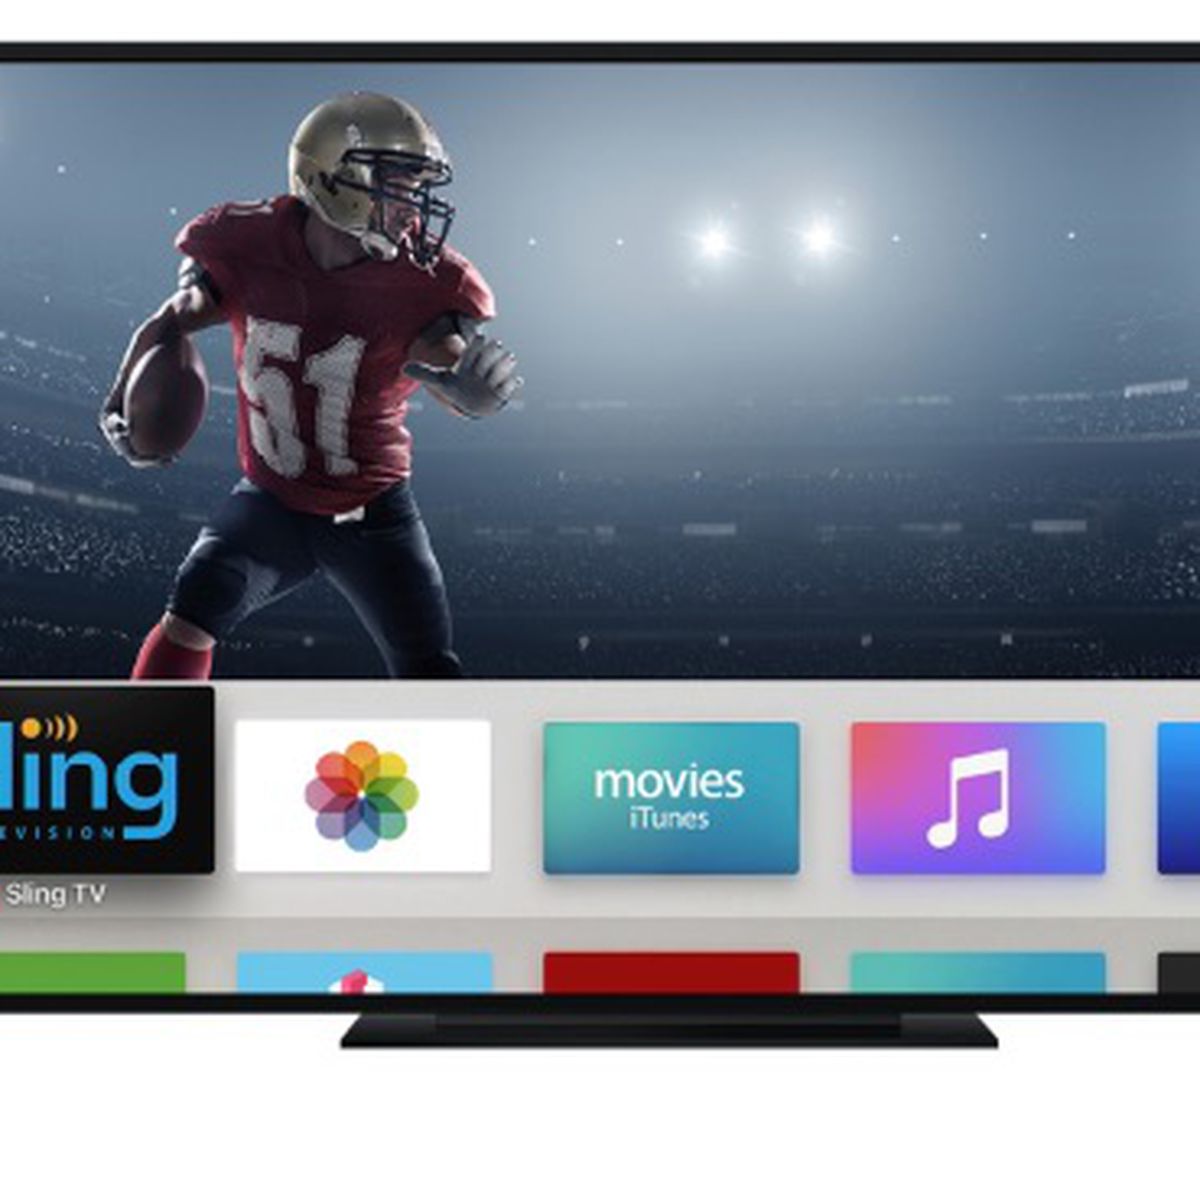 how do you access sling tv on apple tv